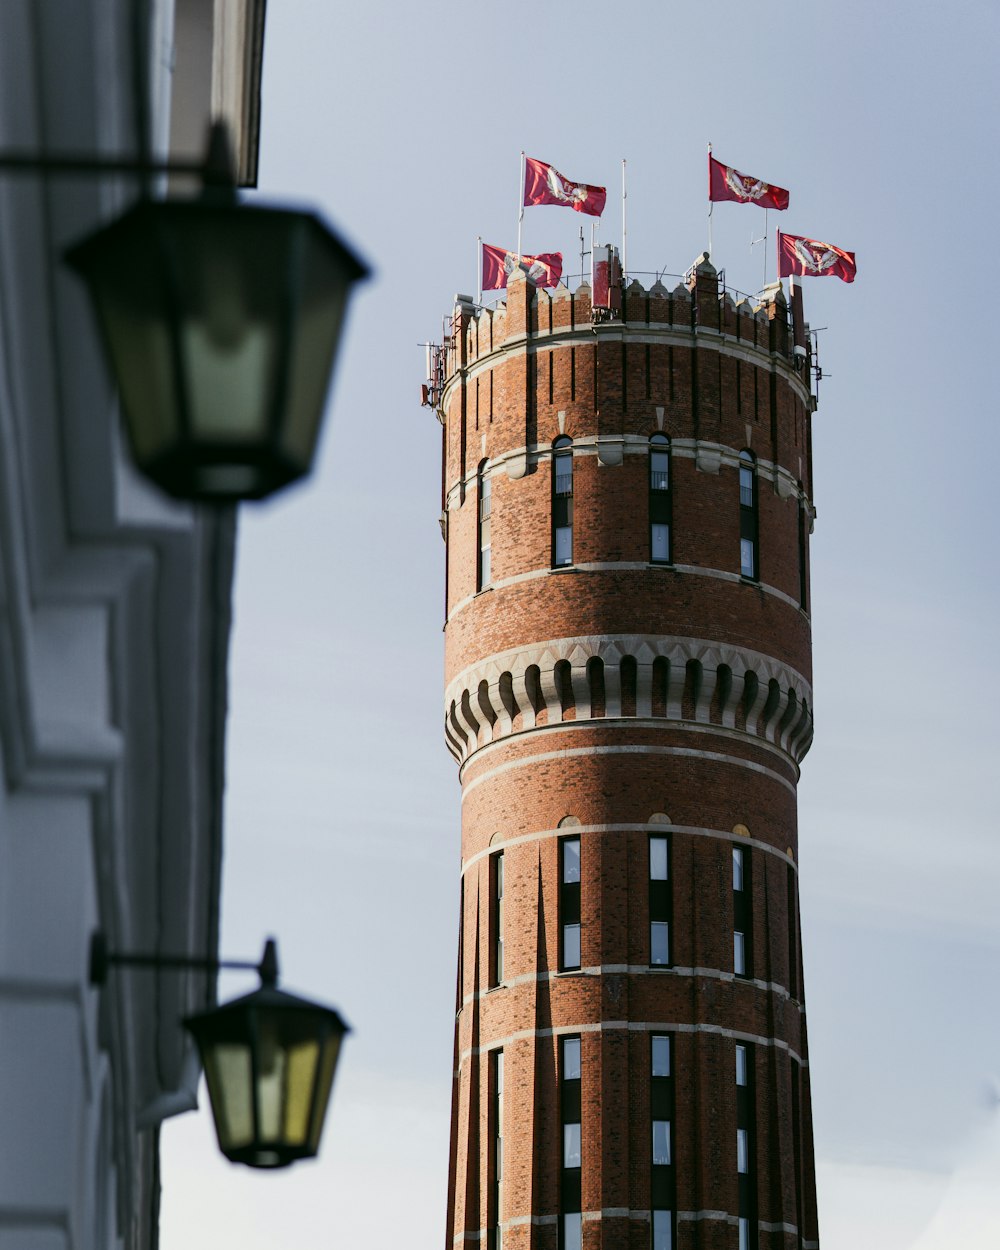 a tall brick tower with flags on top of it